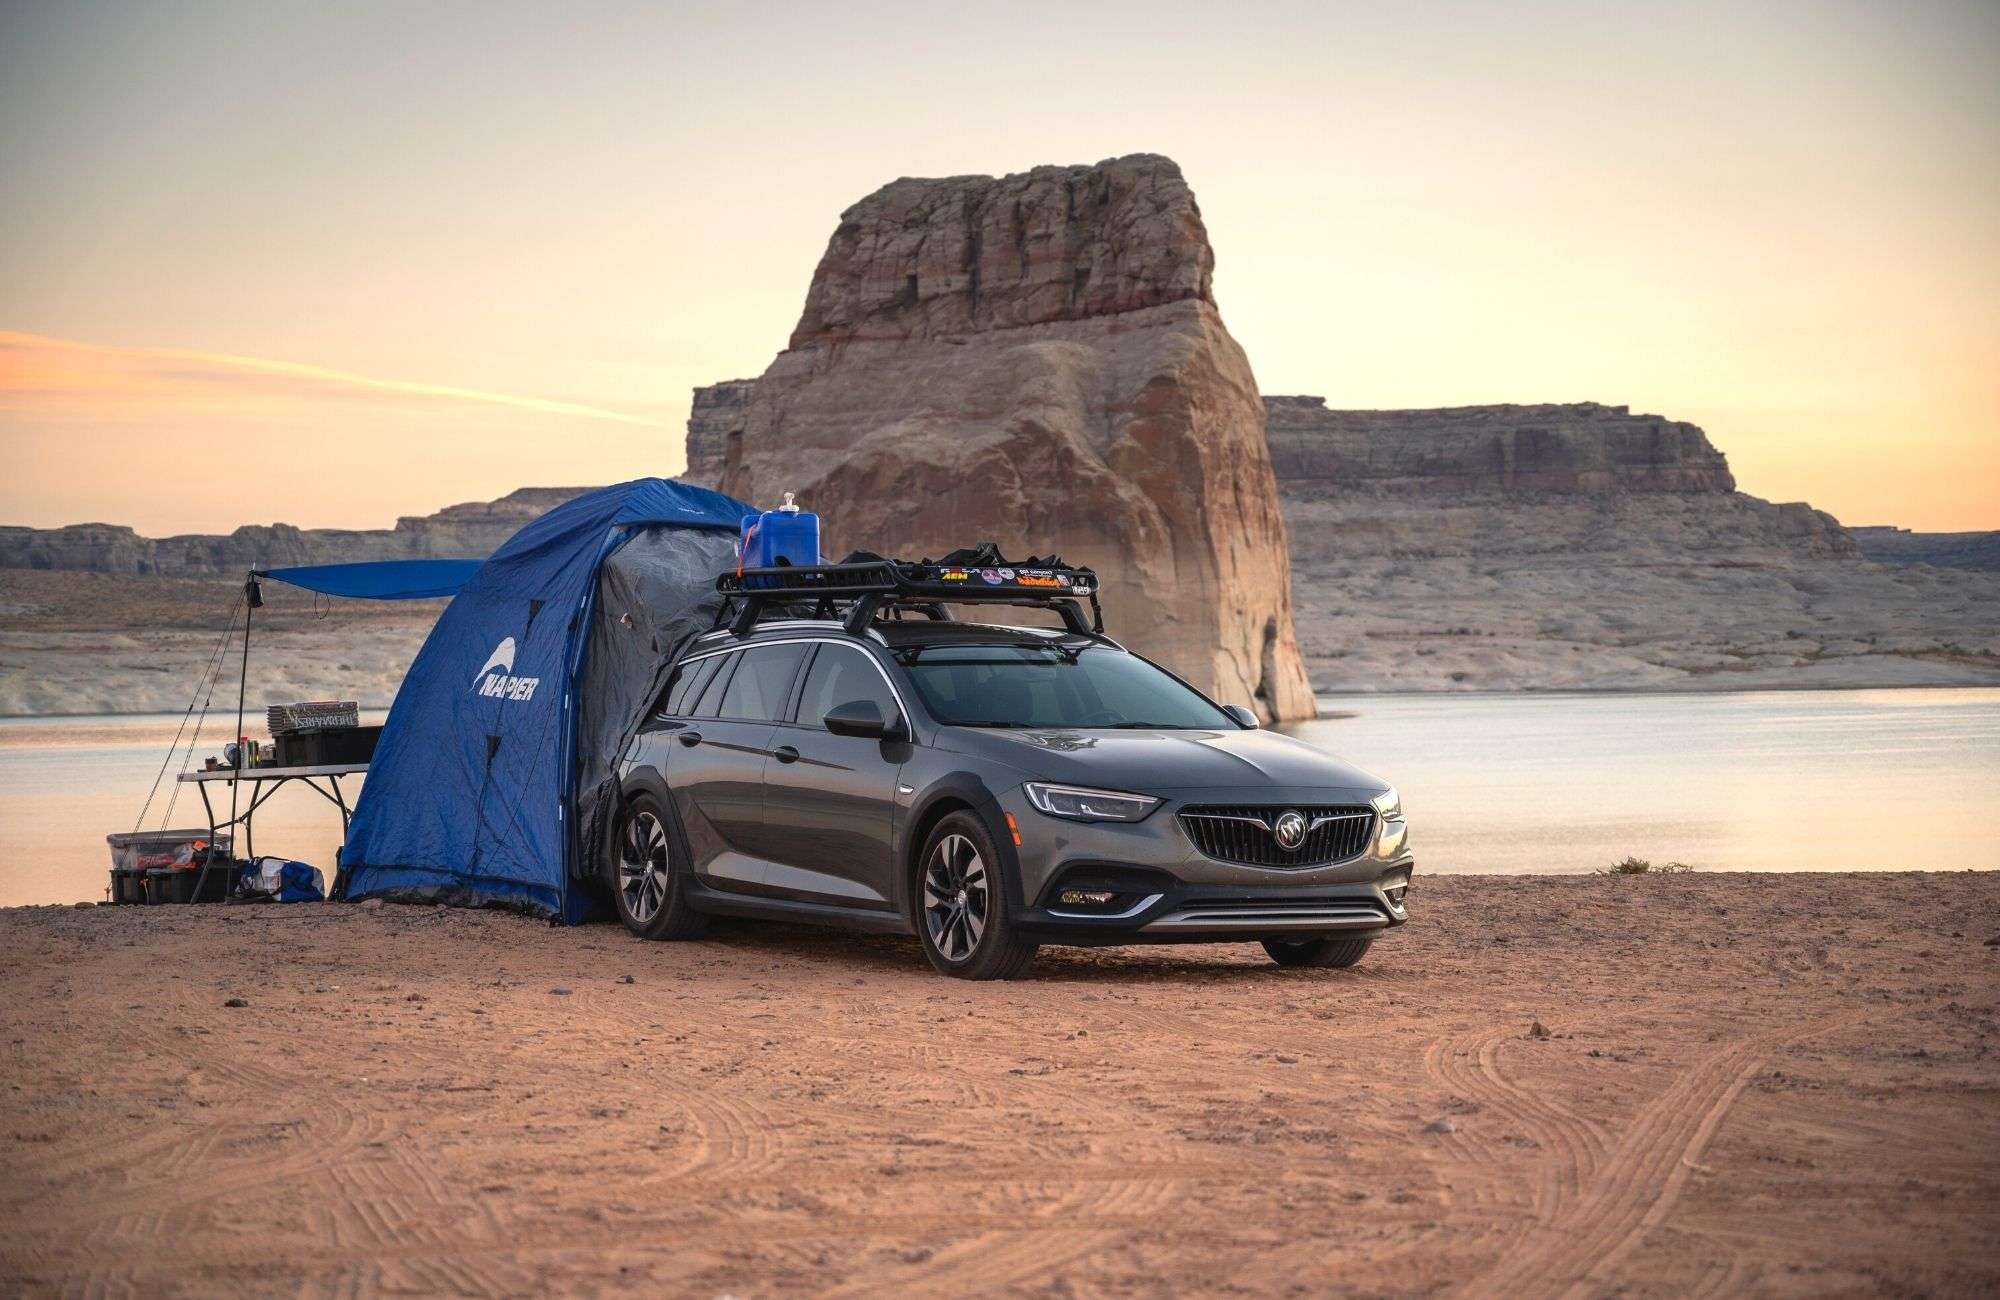 7 Best SUV Tents for Camping - Mortons on the Move